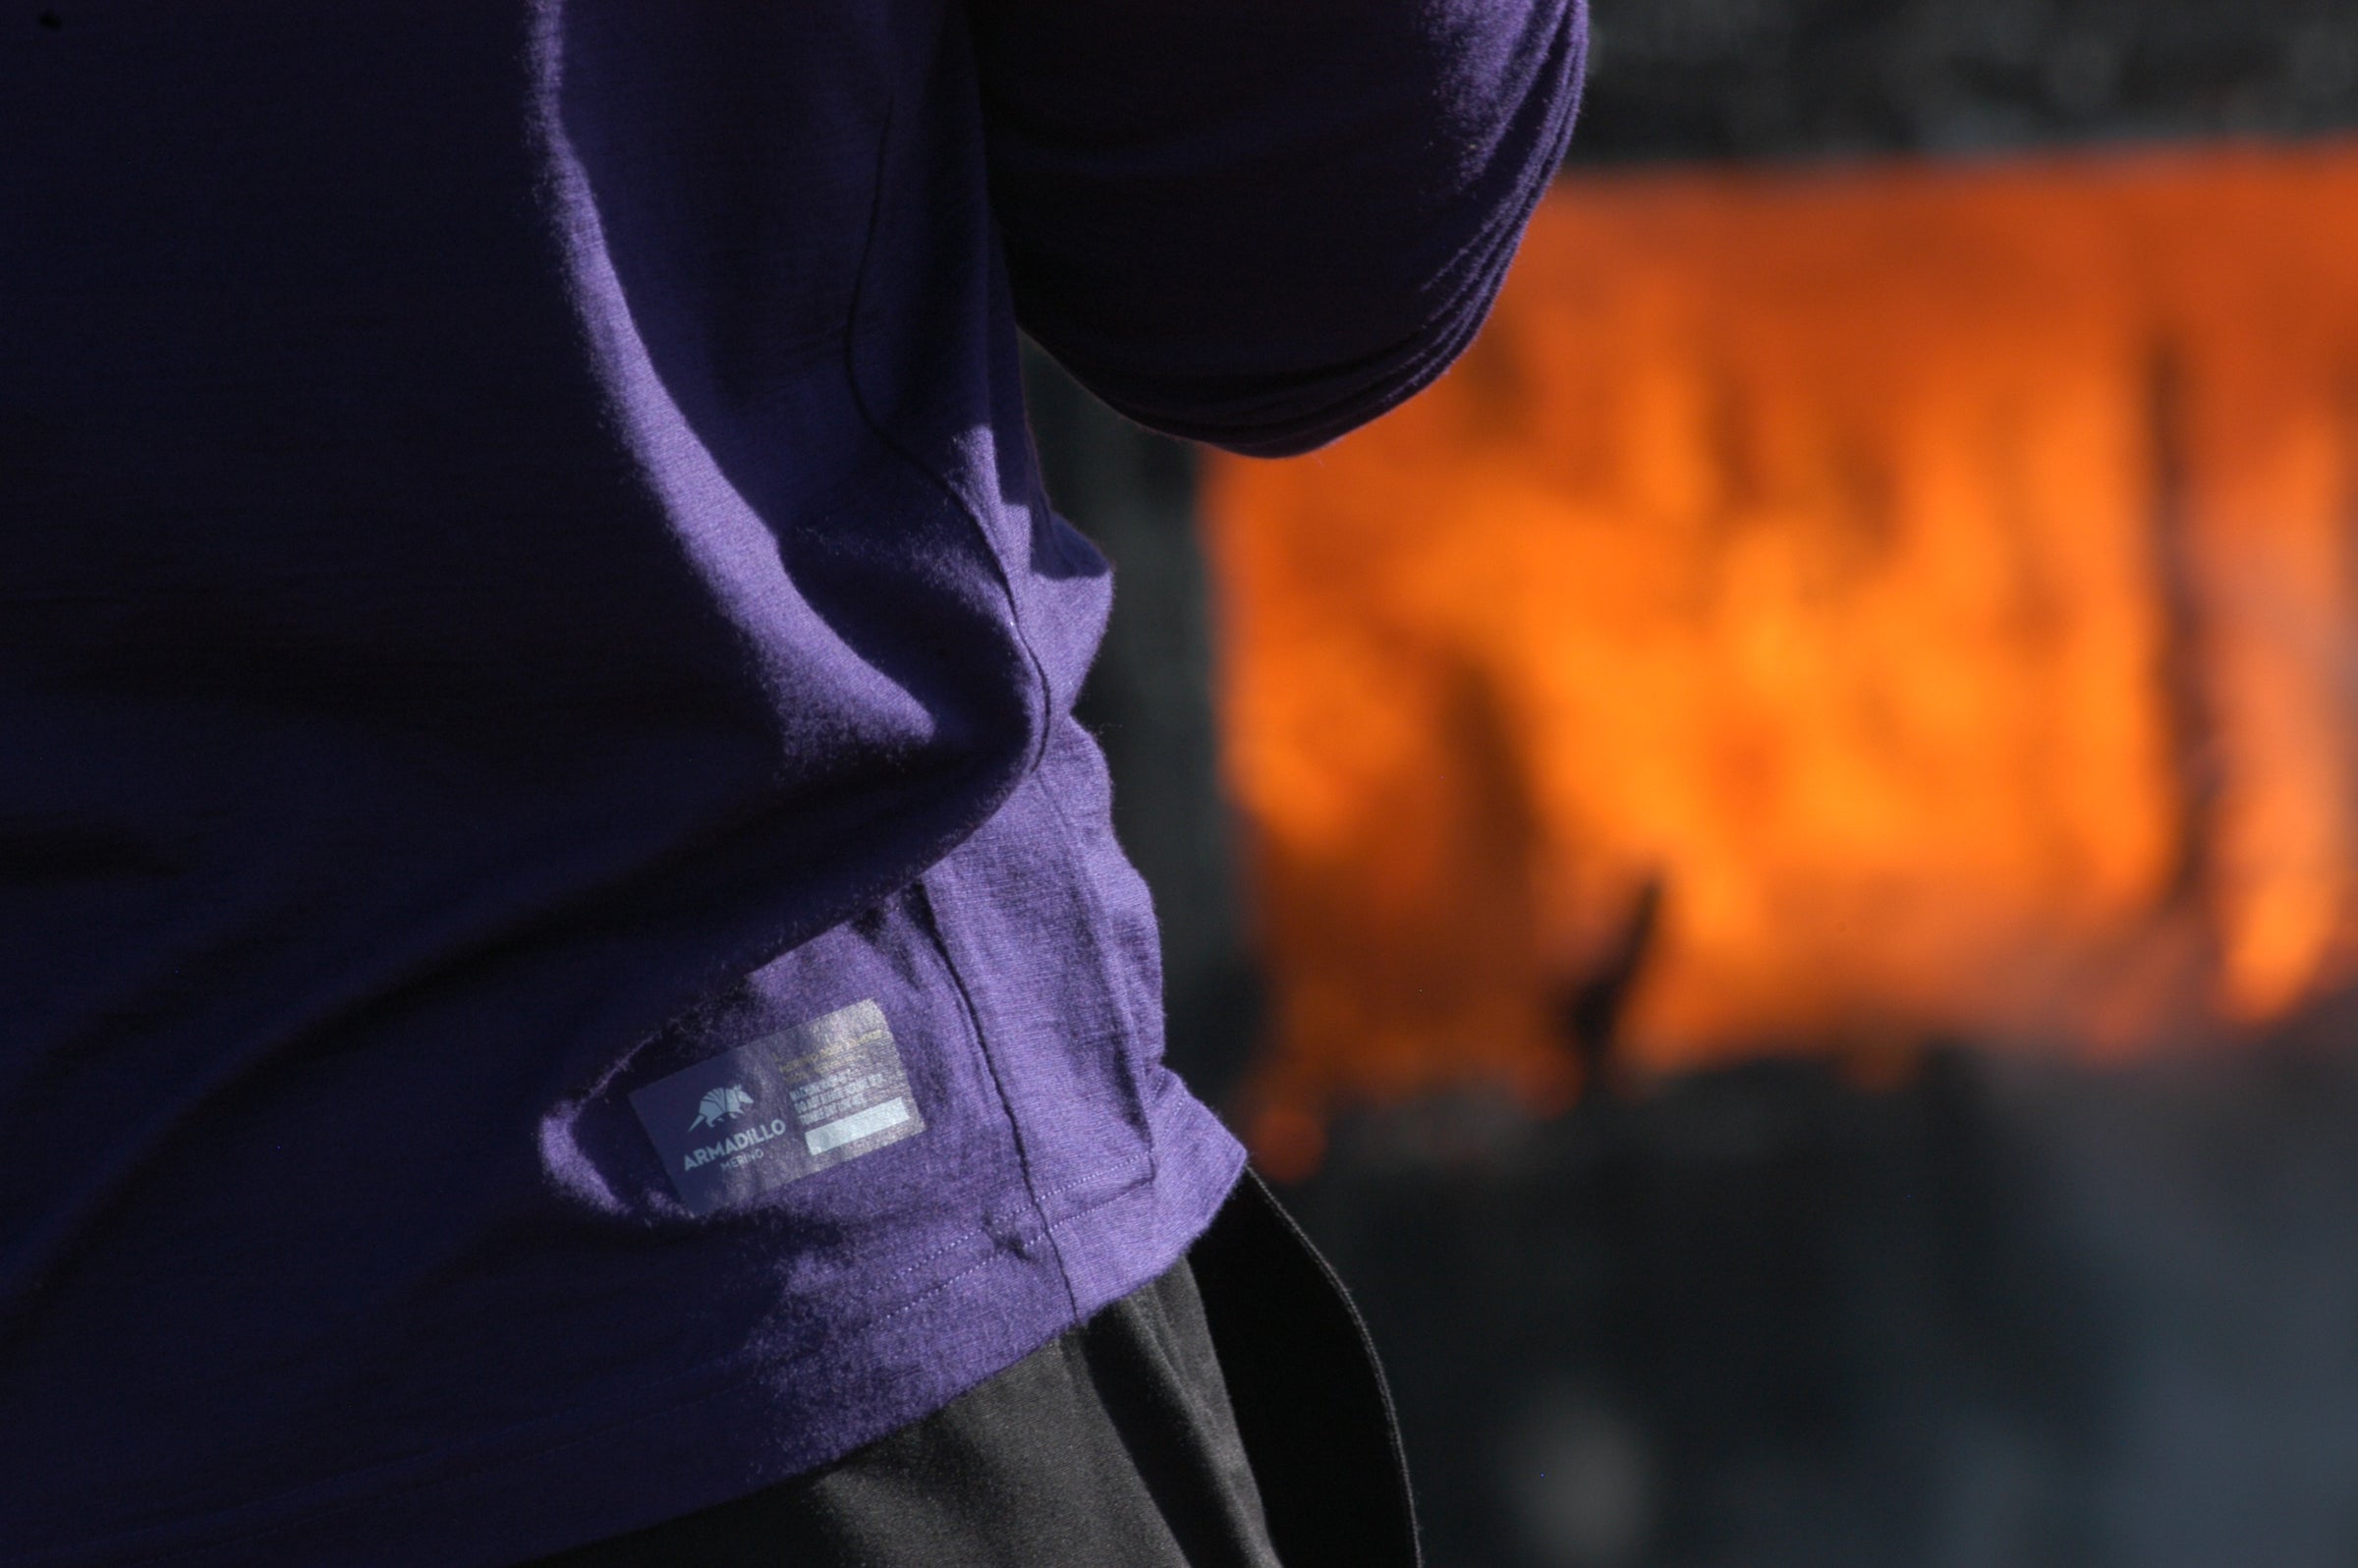 Standing outside the fire in Armadillo Merino USA base layers